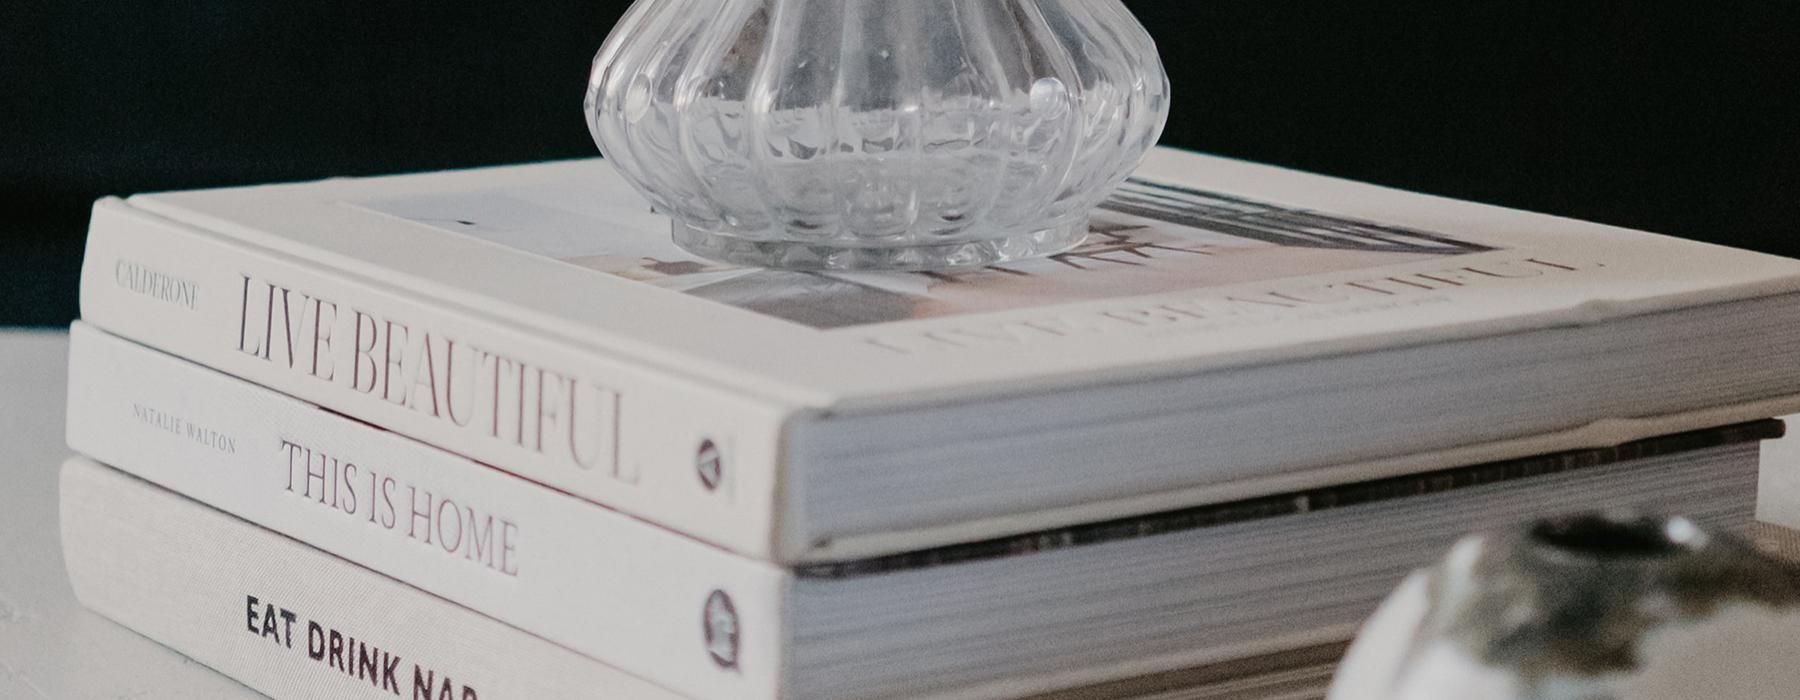 a stack of books and vases on a table